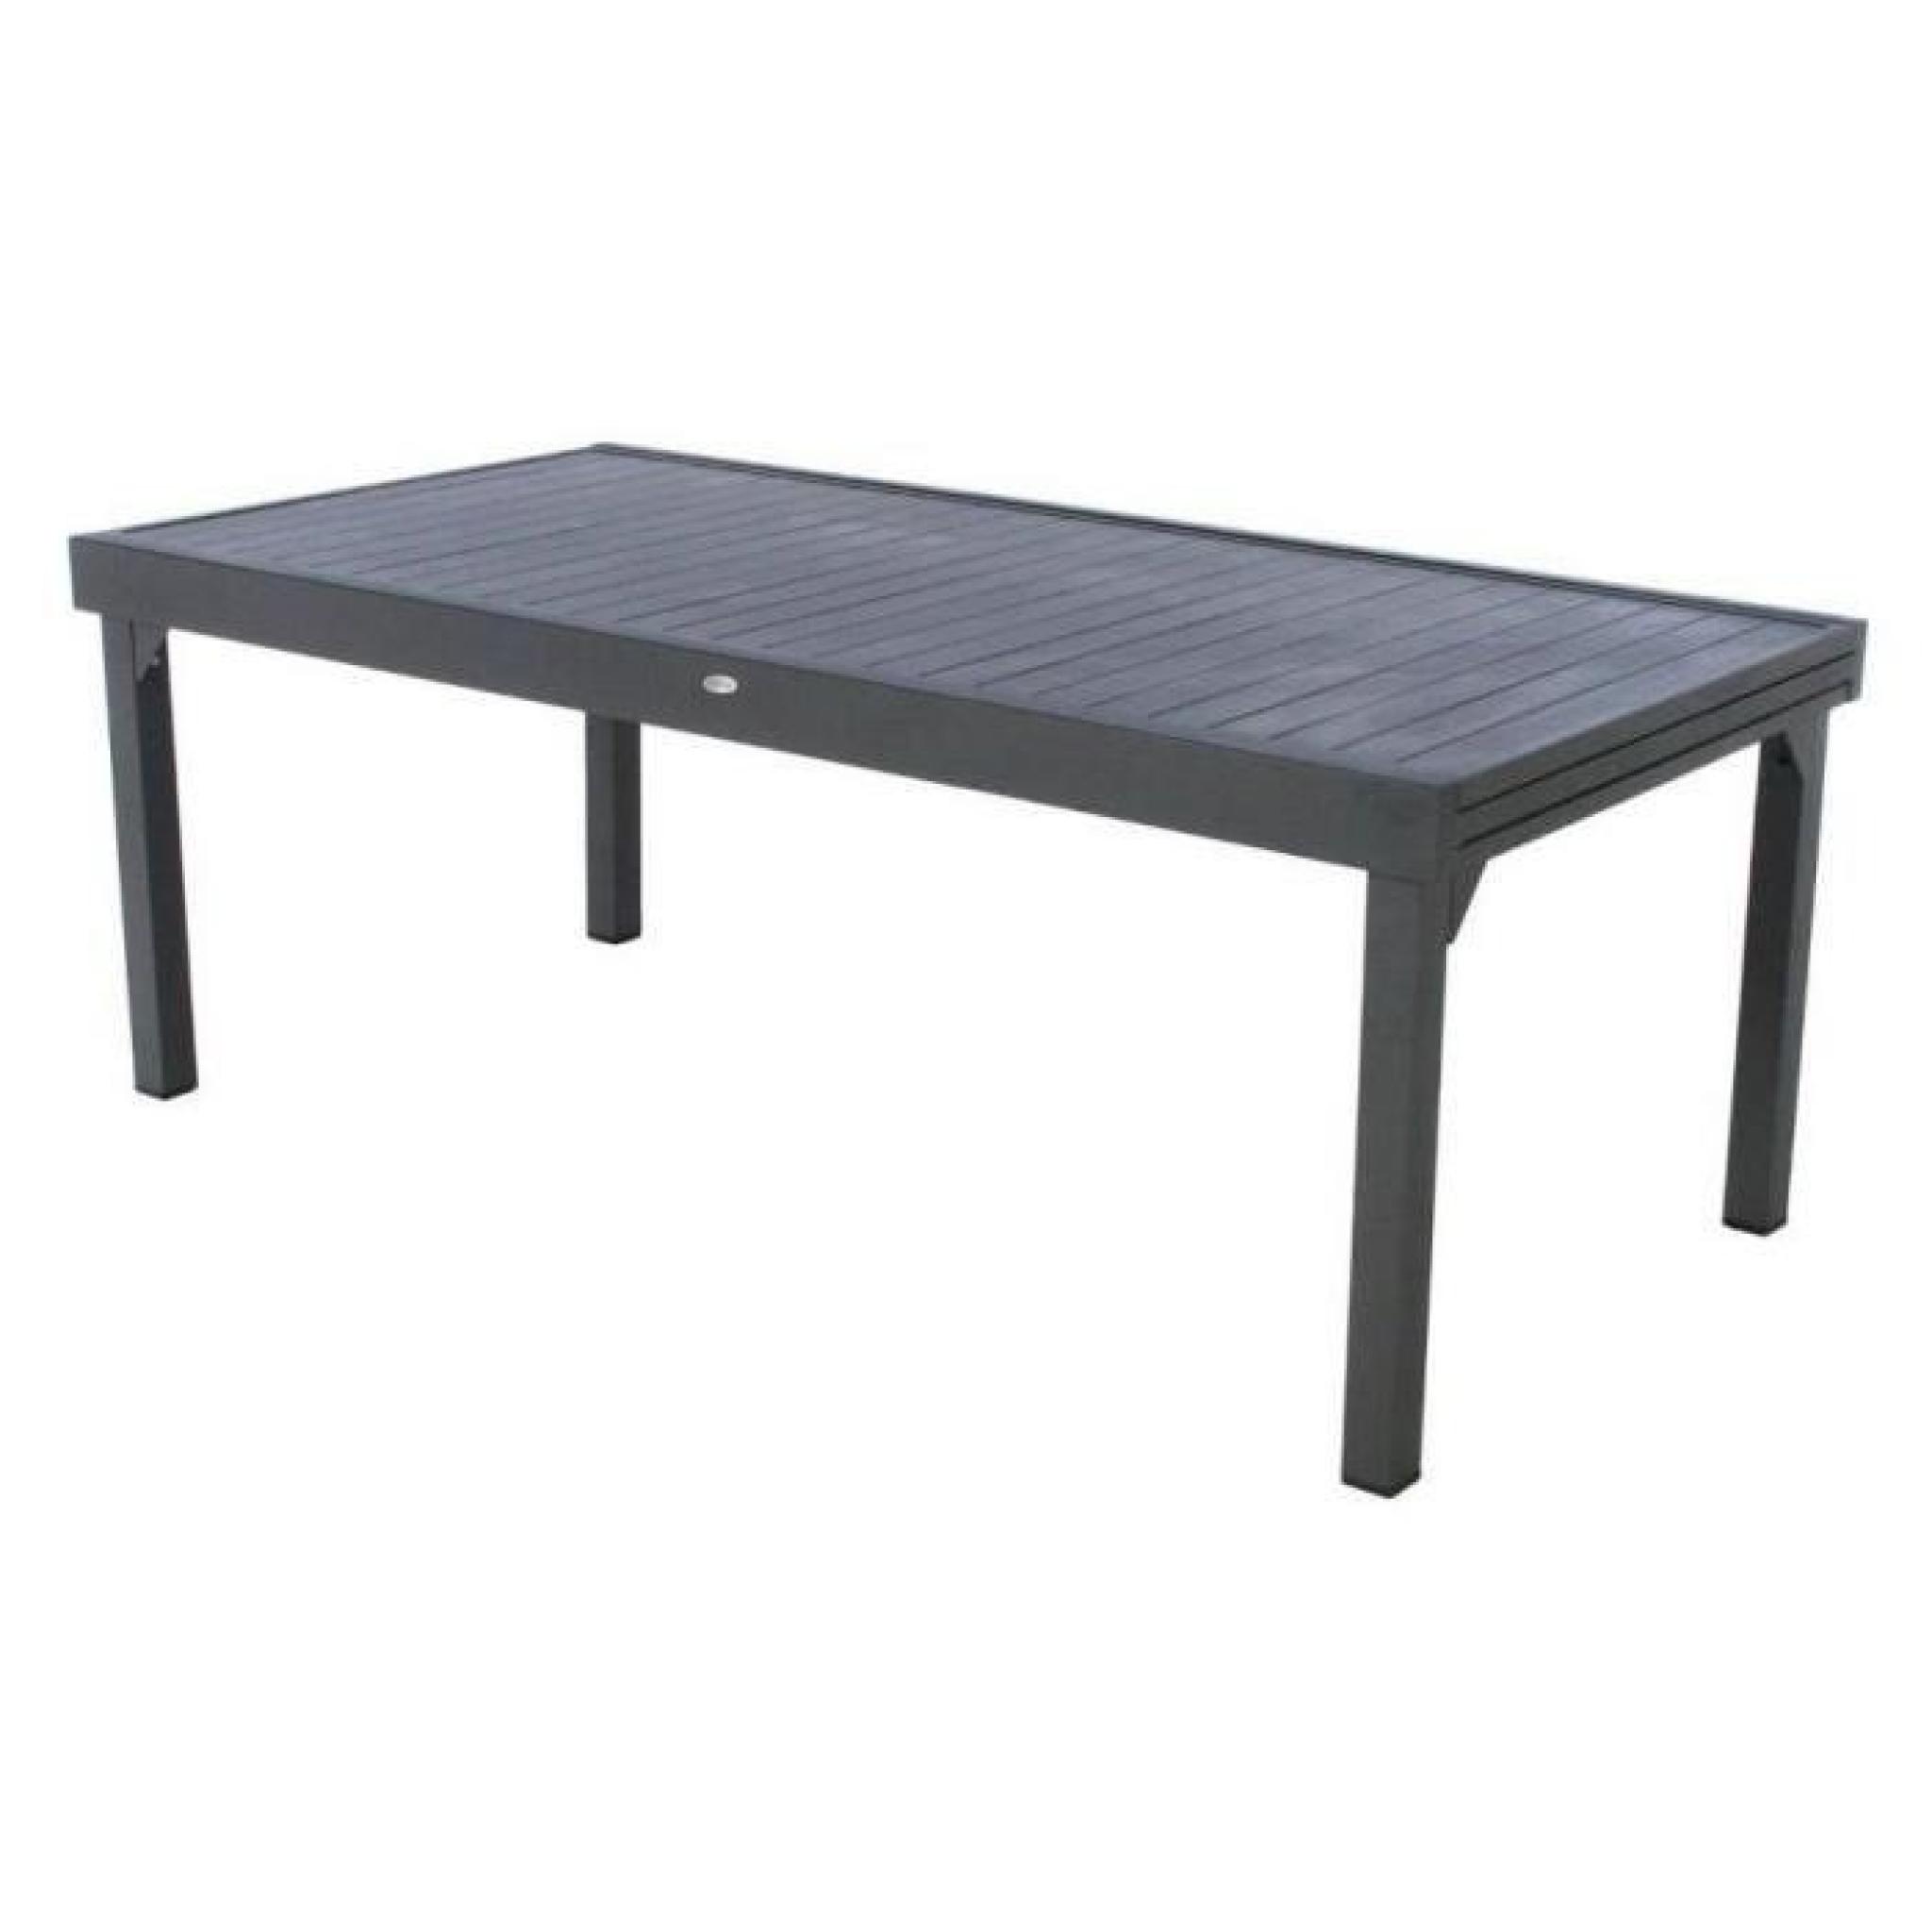 TABLE PIAZZA ALU HESPERIDE EXTENSIBLE 12 P. GRAPHITE pas cher